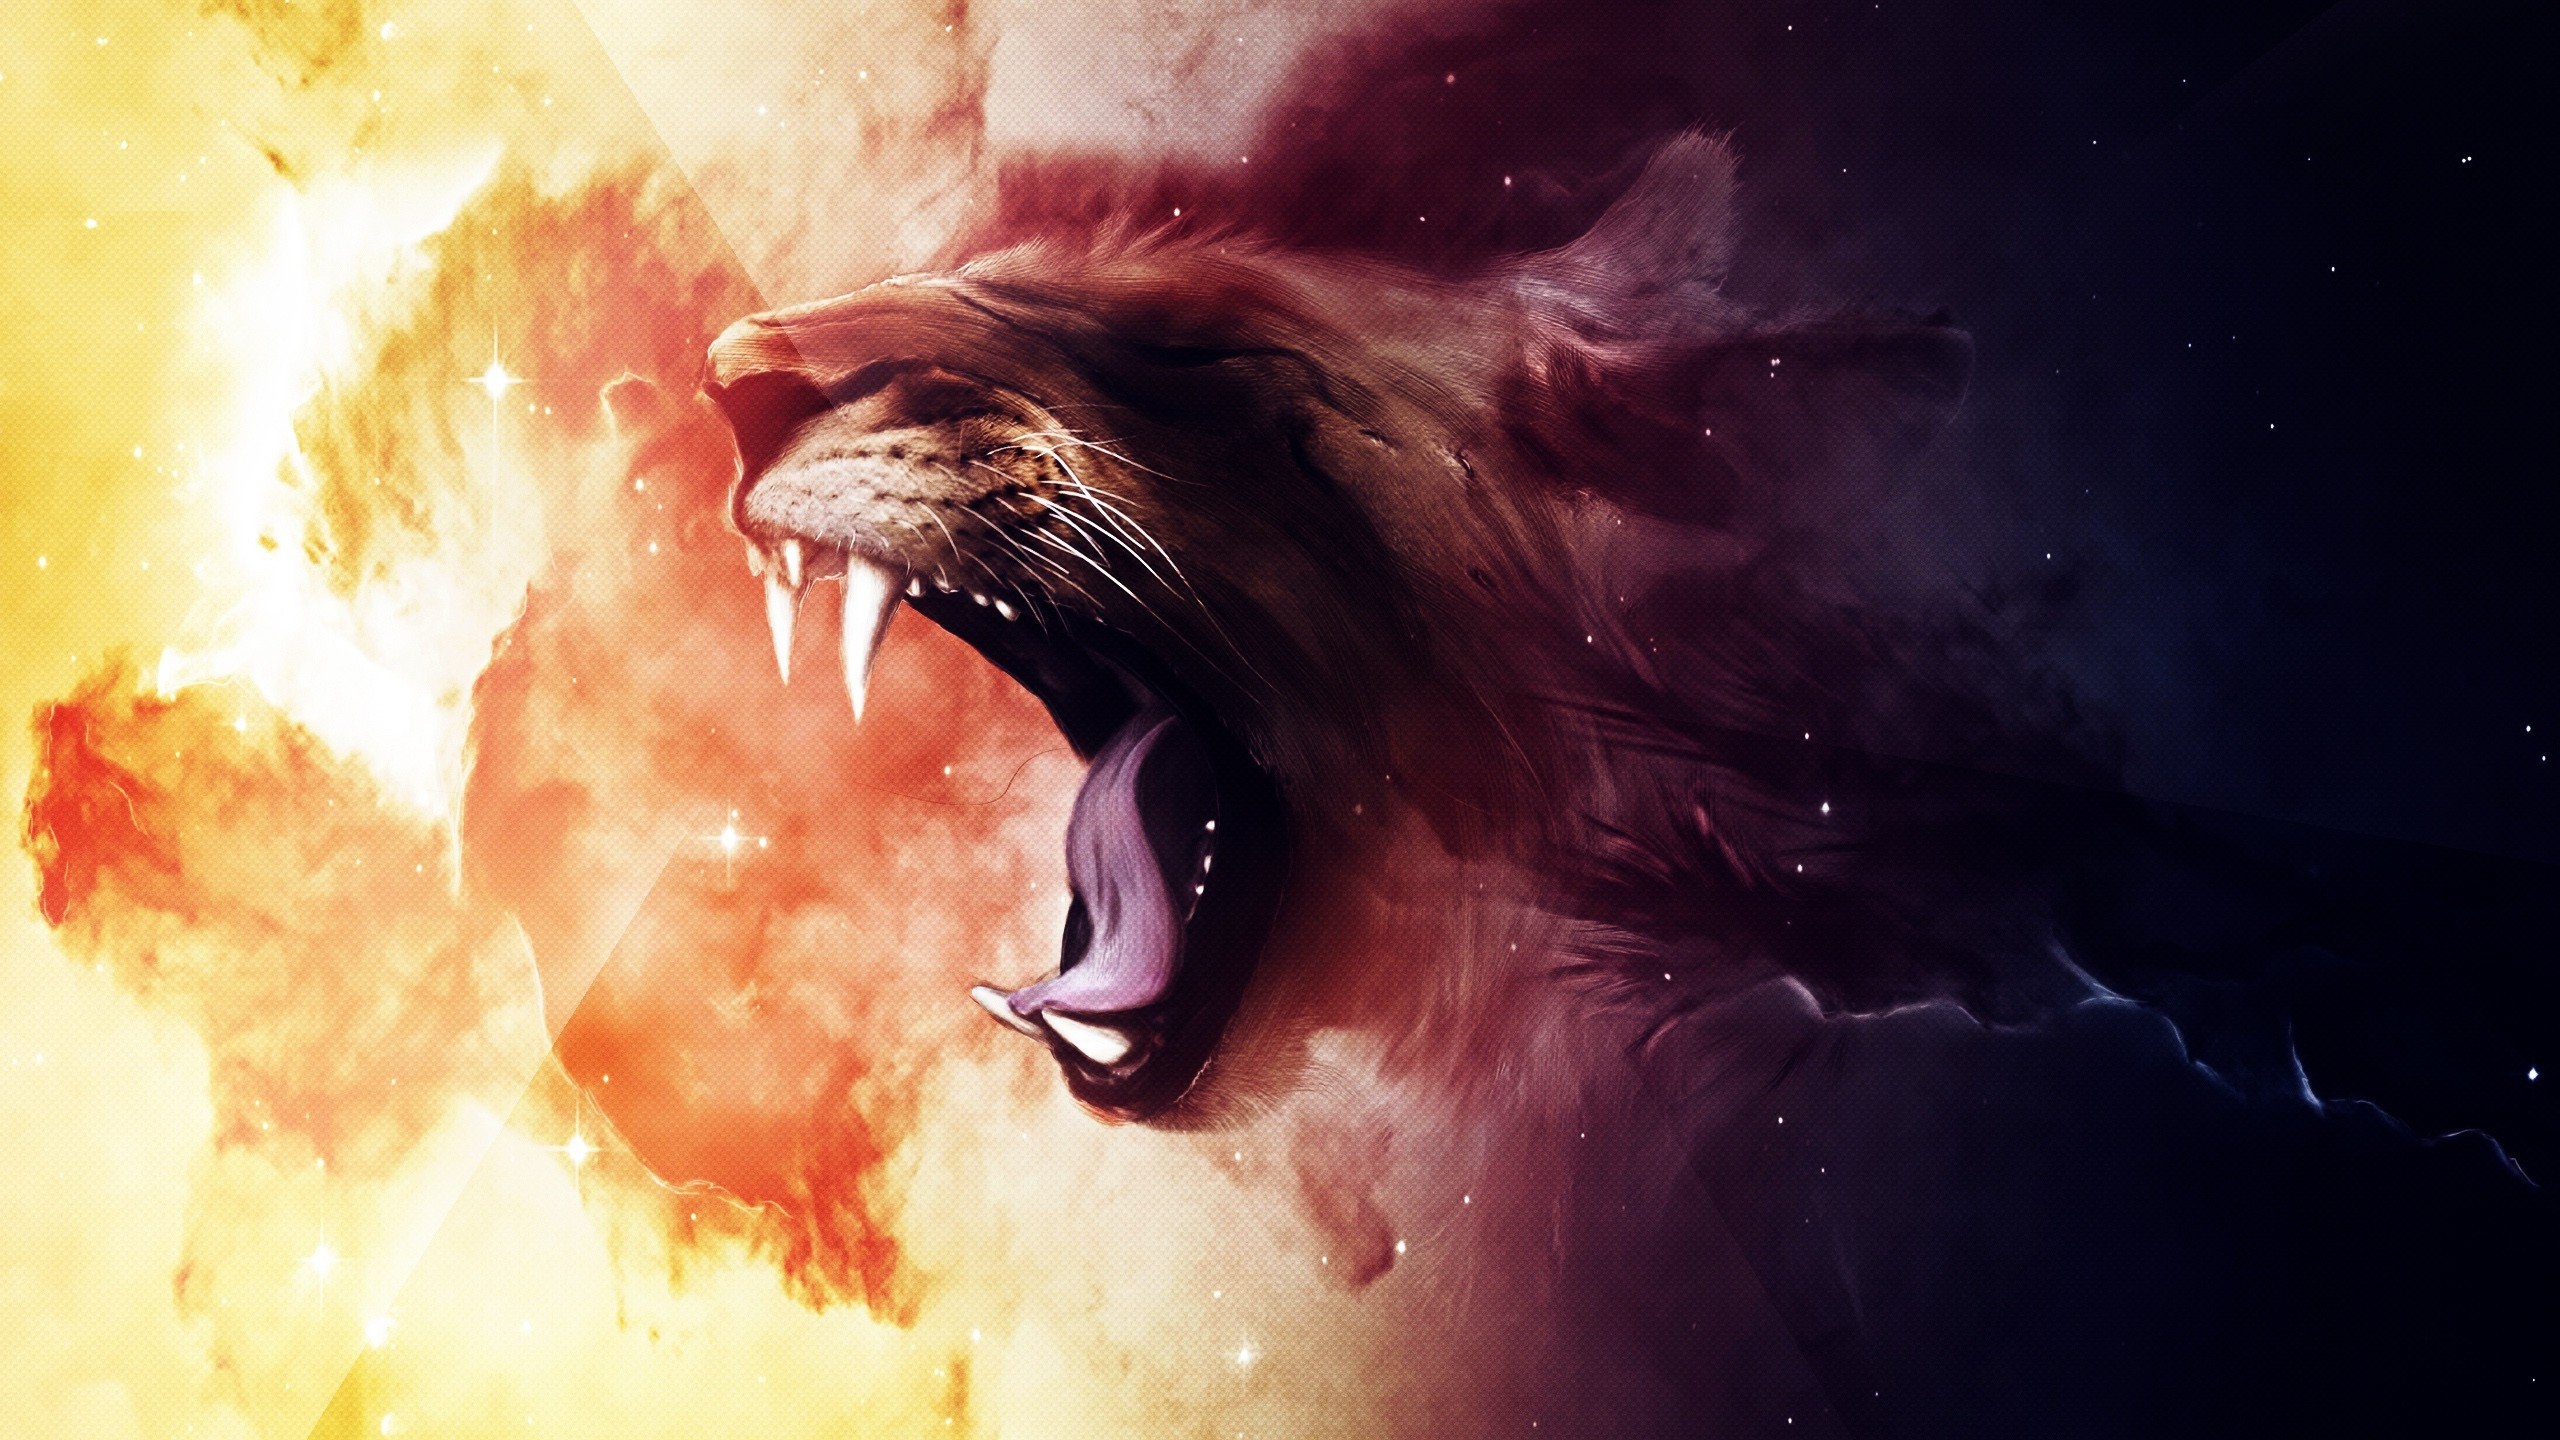 Brown and White Lion Illustration. Wallpaper in 2560x1440 Resolution